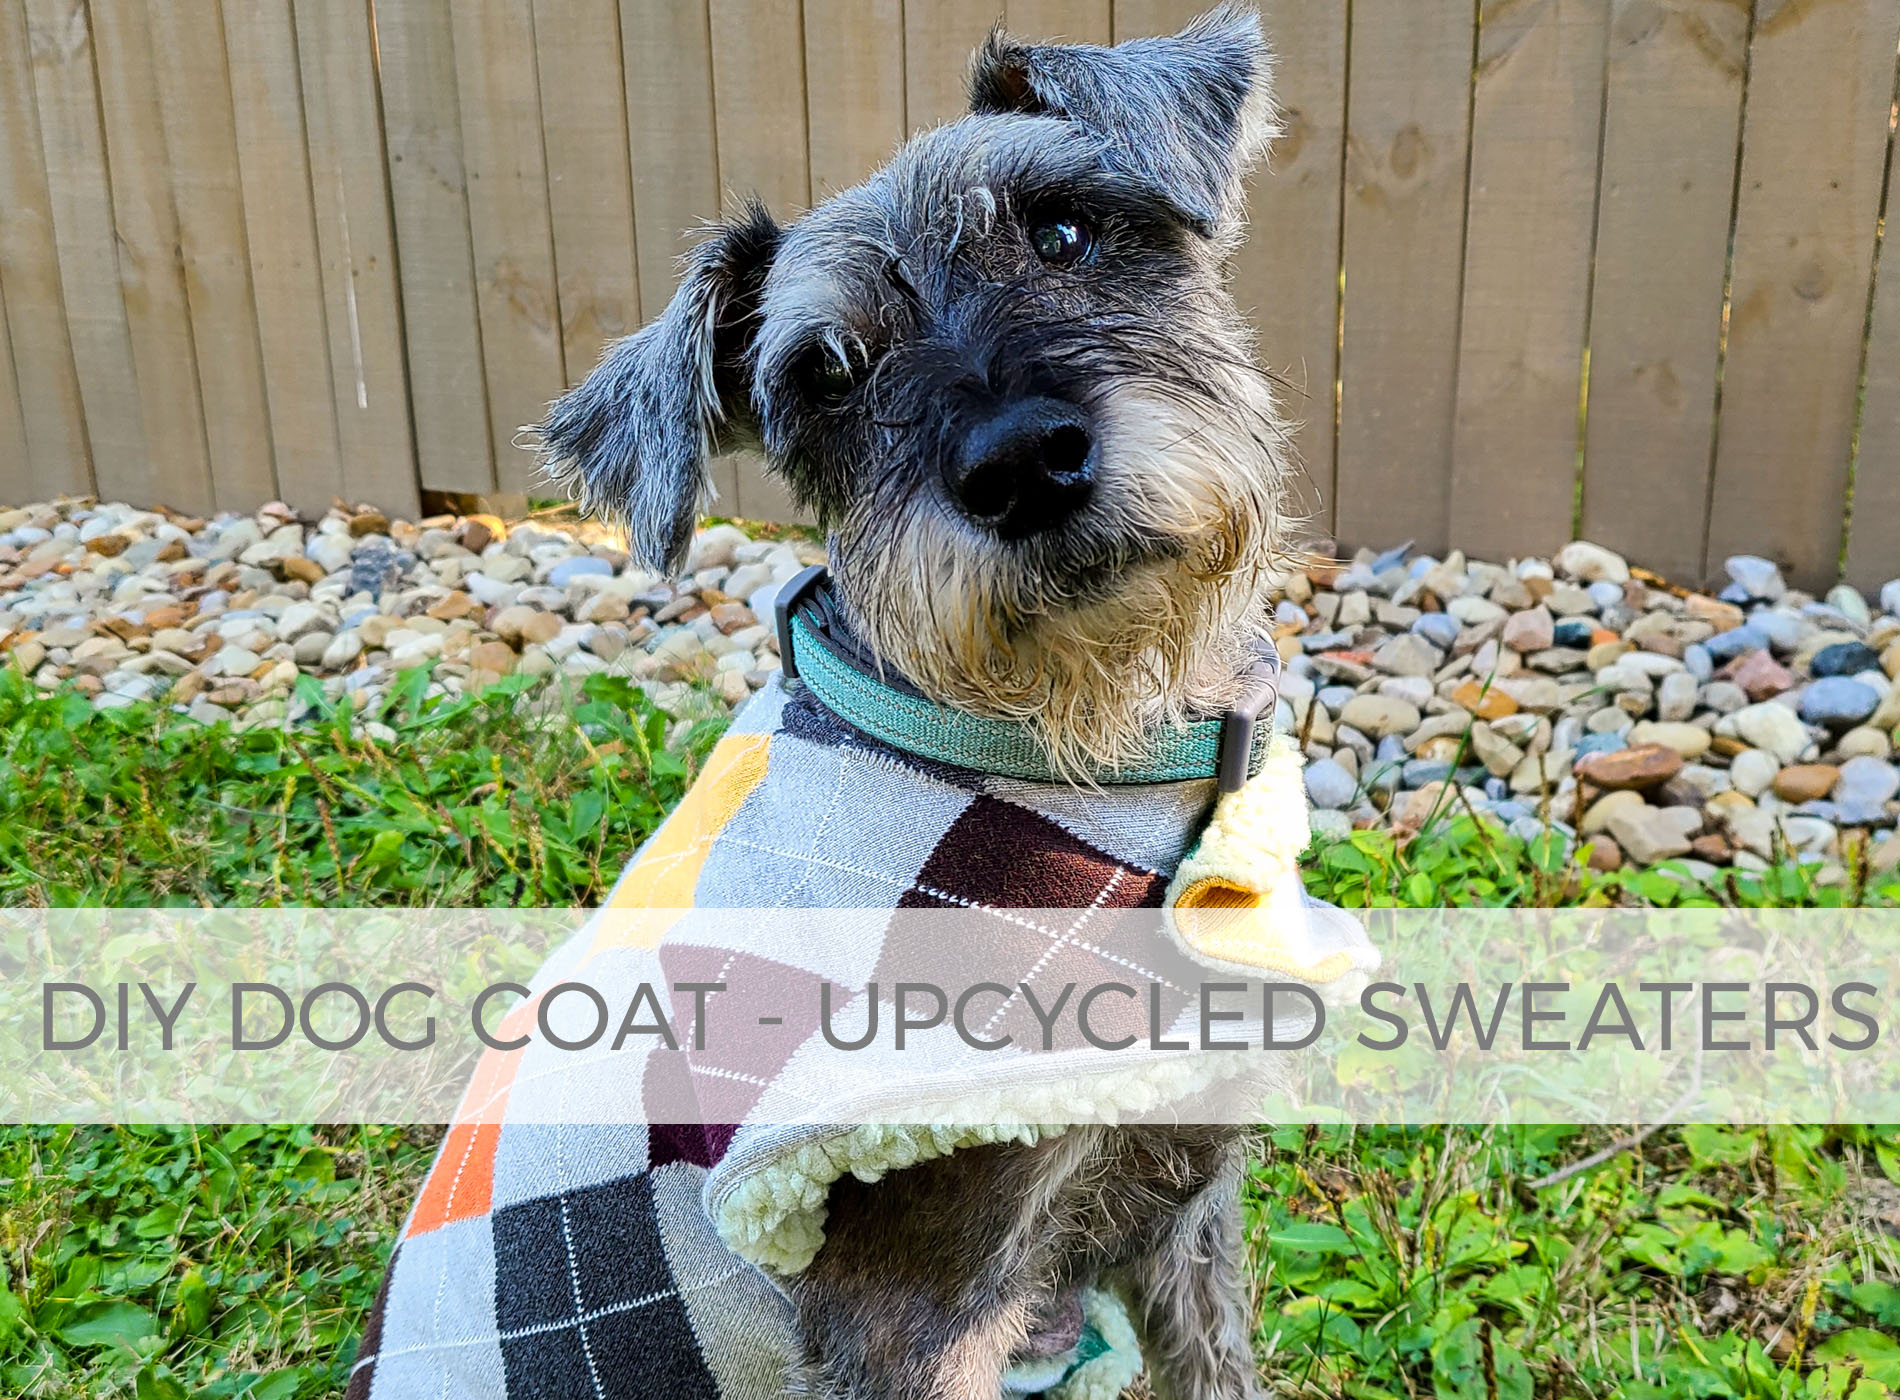 DIY Dog Coat Tutorial from Upcycled Sweaters by Larissa of Prodigal Pieces | prodigalpieces.com #prodigalpieces #diy #sewing #dog #pets